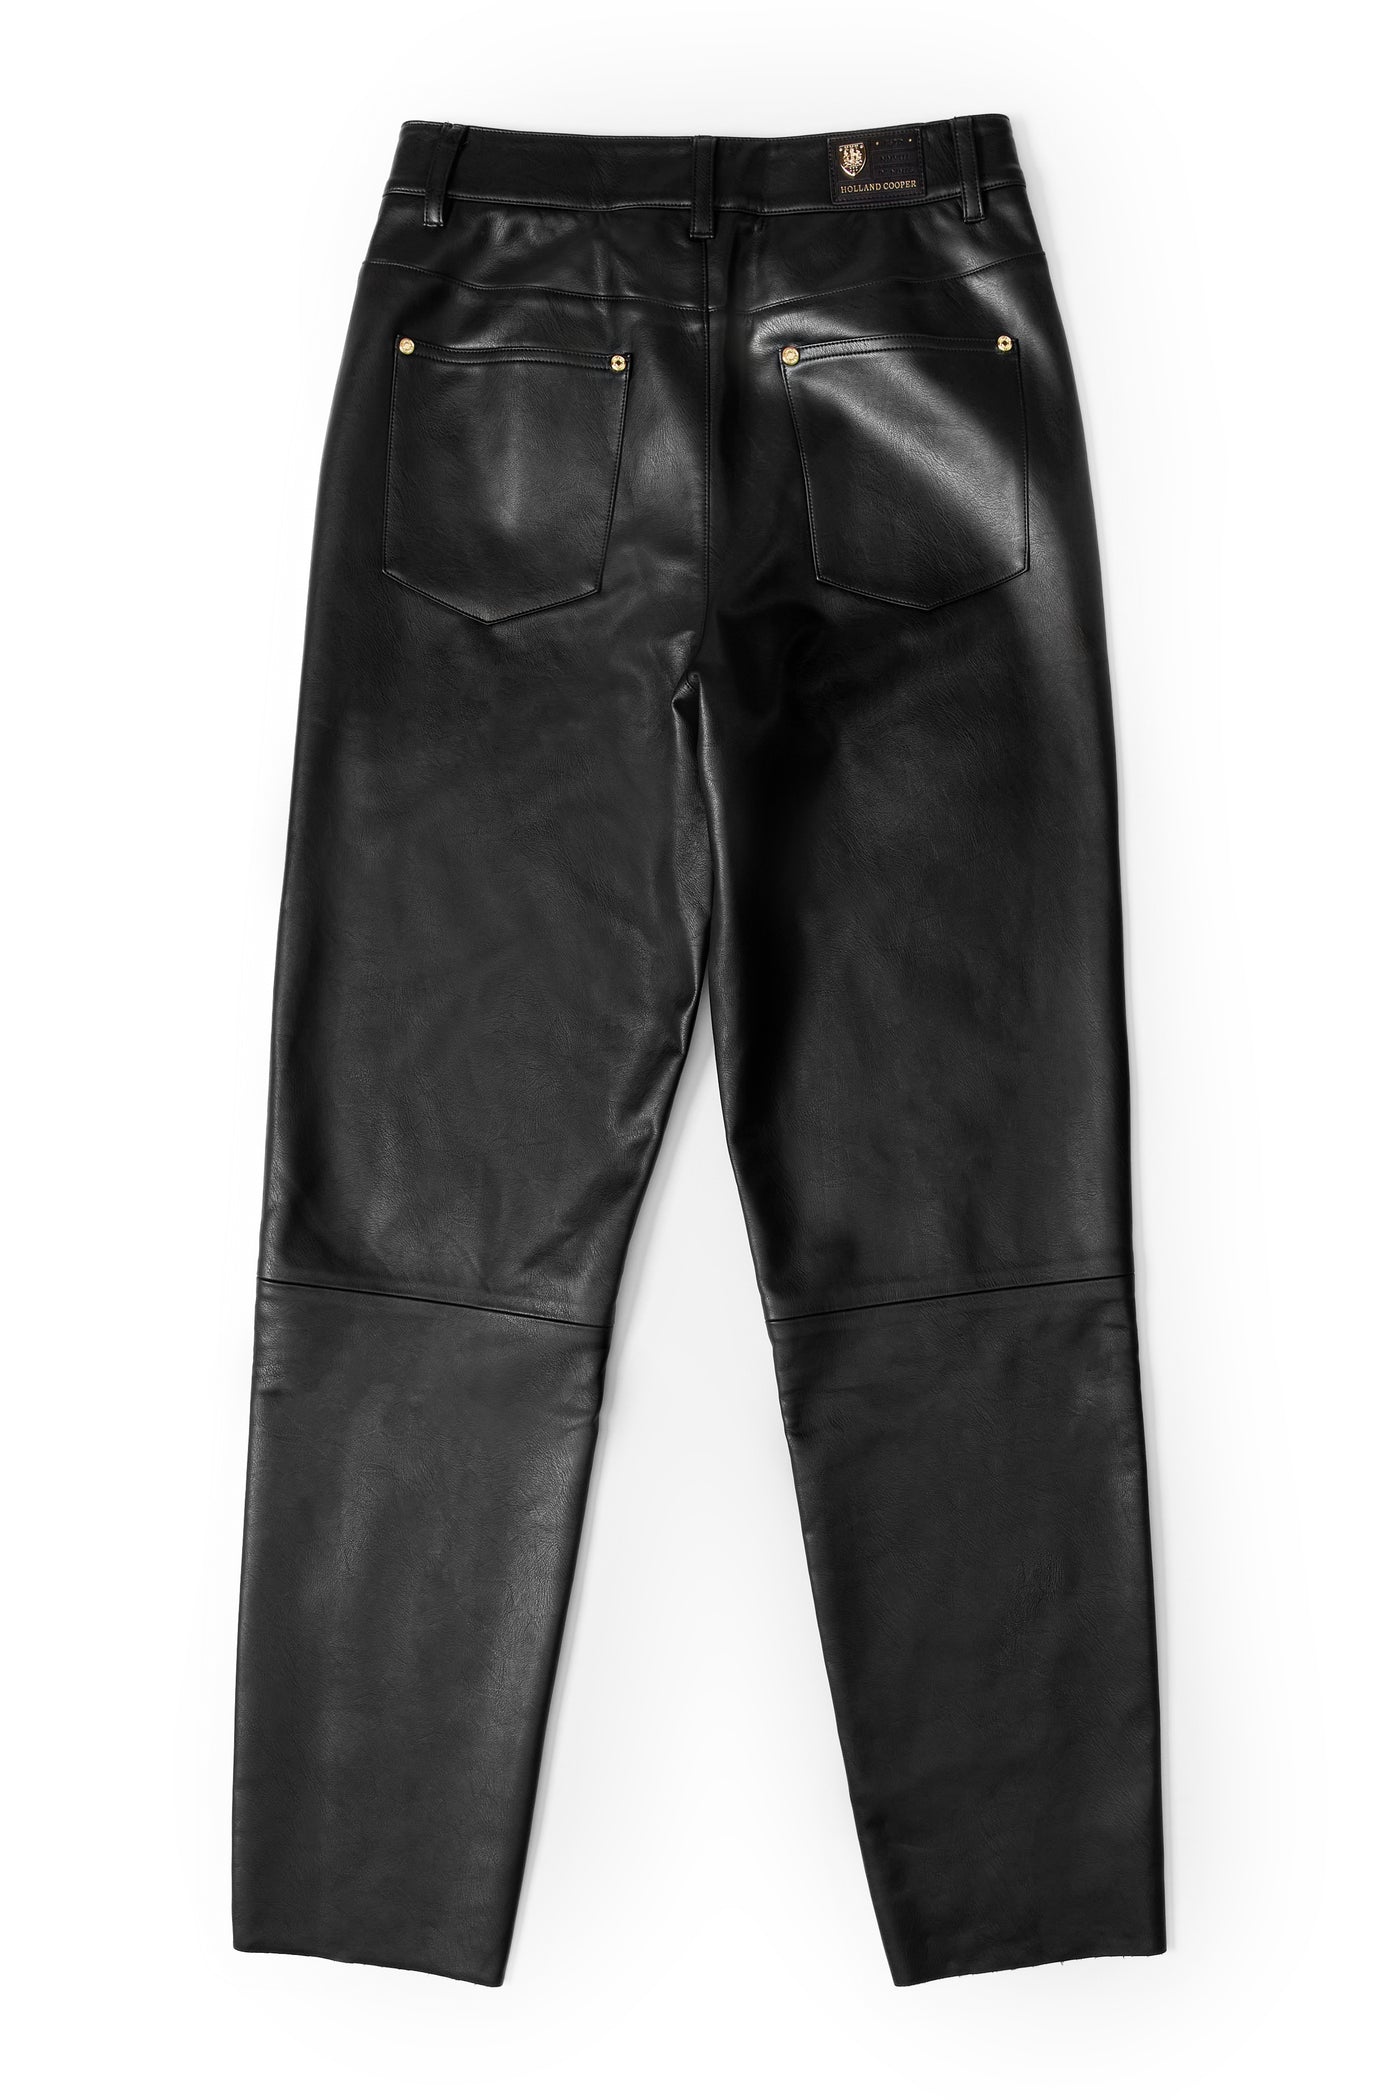 Holland Cooper Dunwick Faux Leather Pant in Black